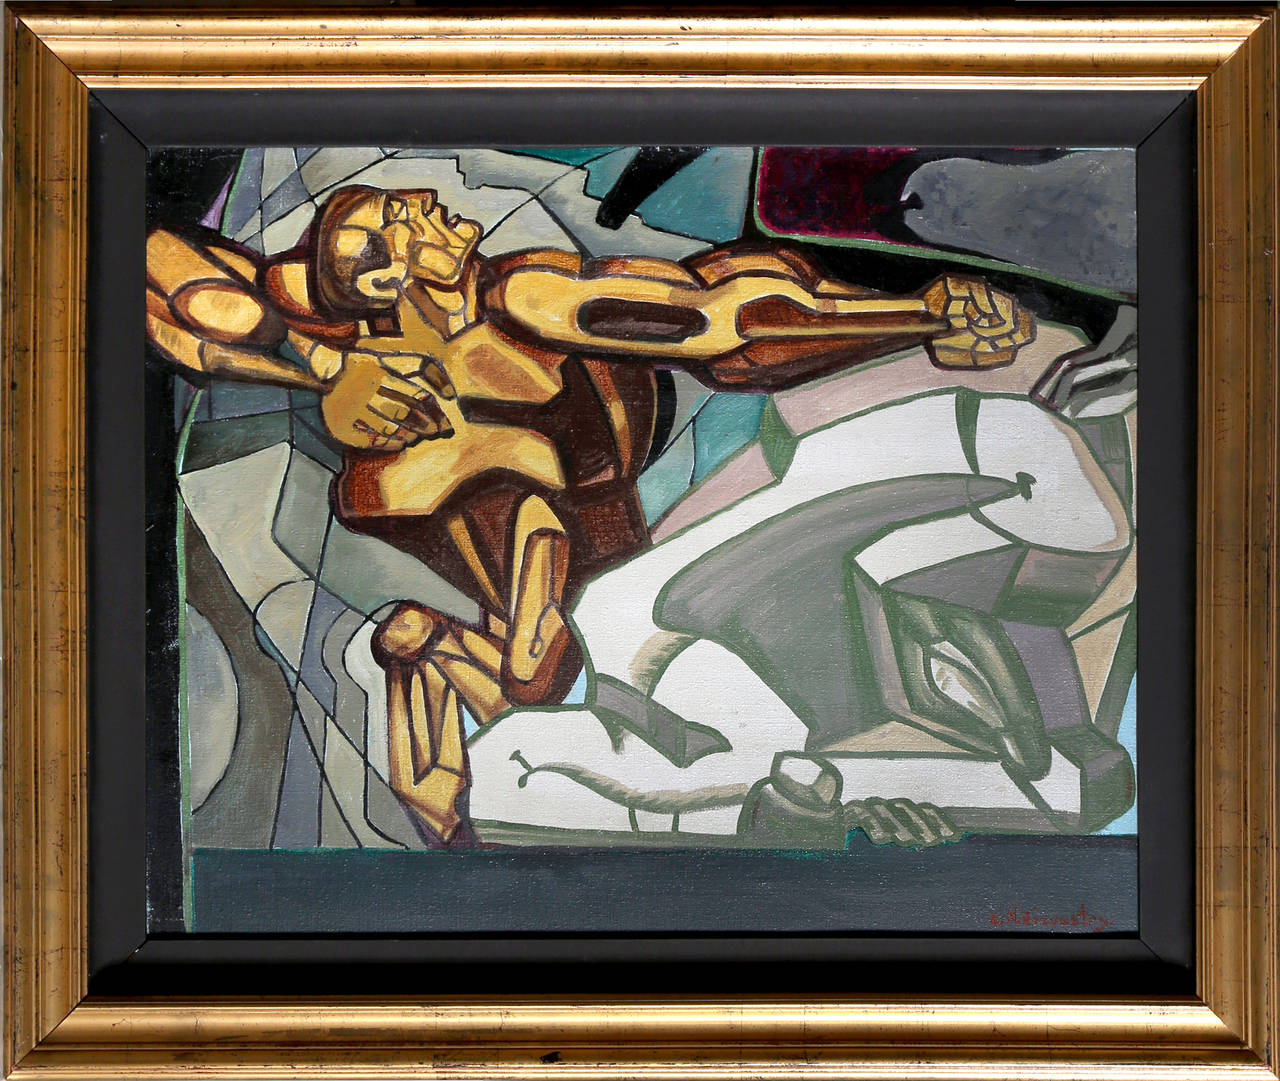 An oil painting by Ernst Neizvestny from 1984. An abstract modernist depiction of two figures in a dramatically expressive scene of pathos. 

Artist: Ernst Neizvestny
Title: Kepmovr?
Year: 1984
Medium: Oil on Canvas, signed recto, signed, dated and